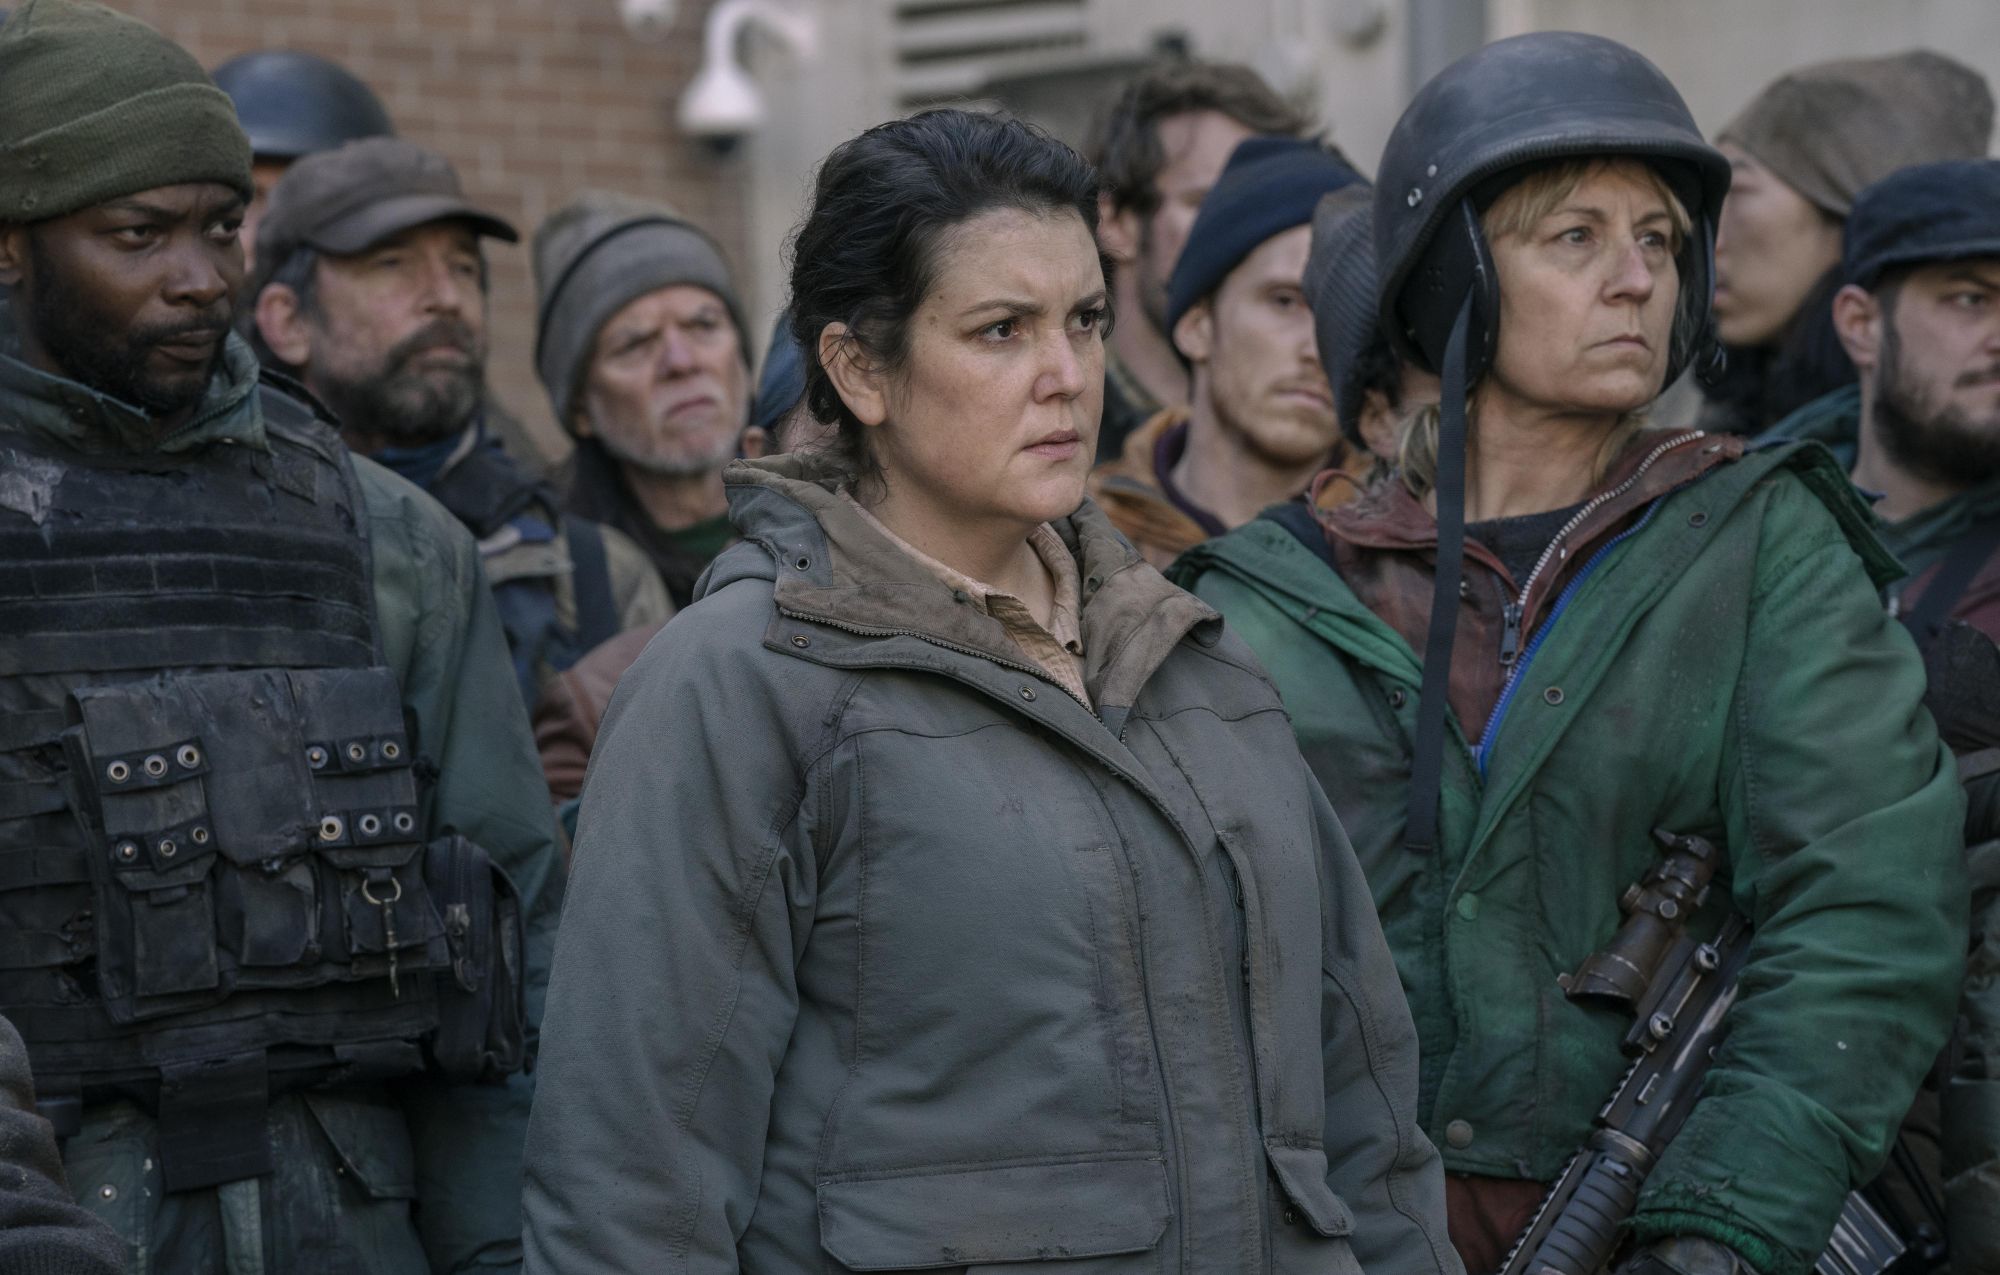 ‘The Last Of Us’ Star Melanie Lynskey Responds To Casting Critics: “I Don’t Need To Be Muscular”